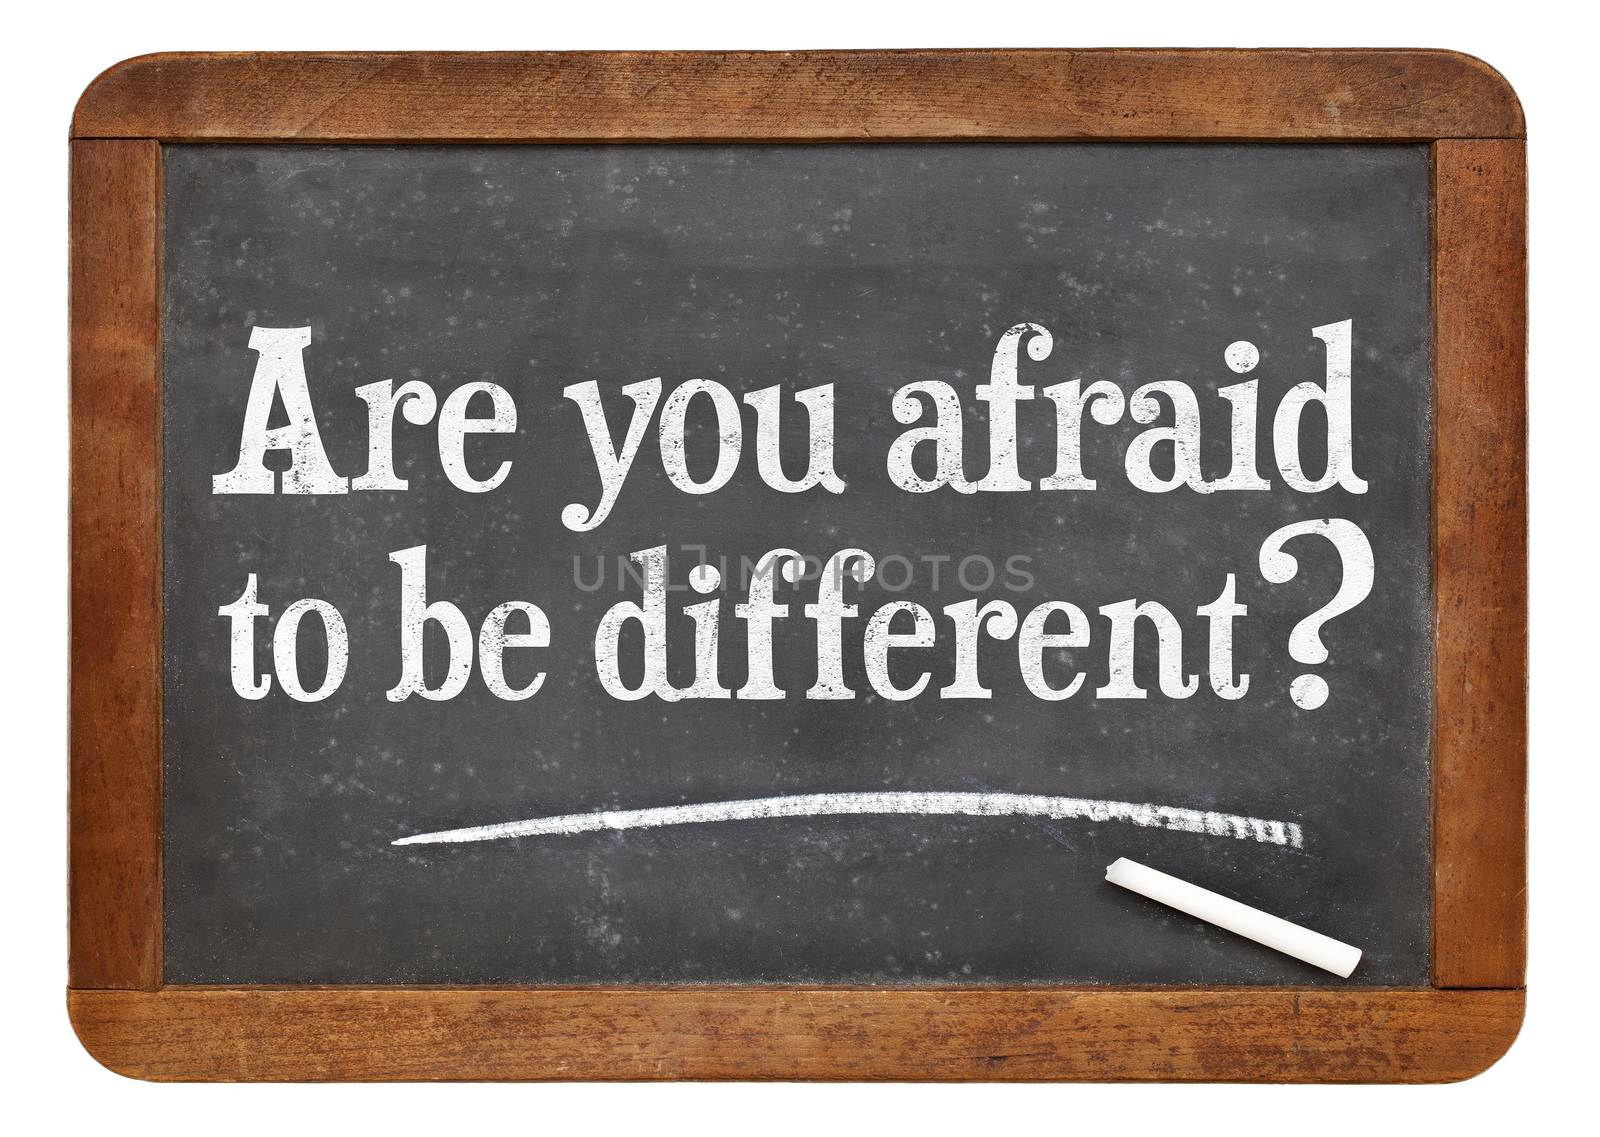 Are you afraid to be different? by PixelsAway